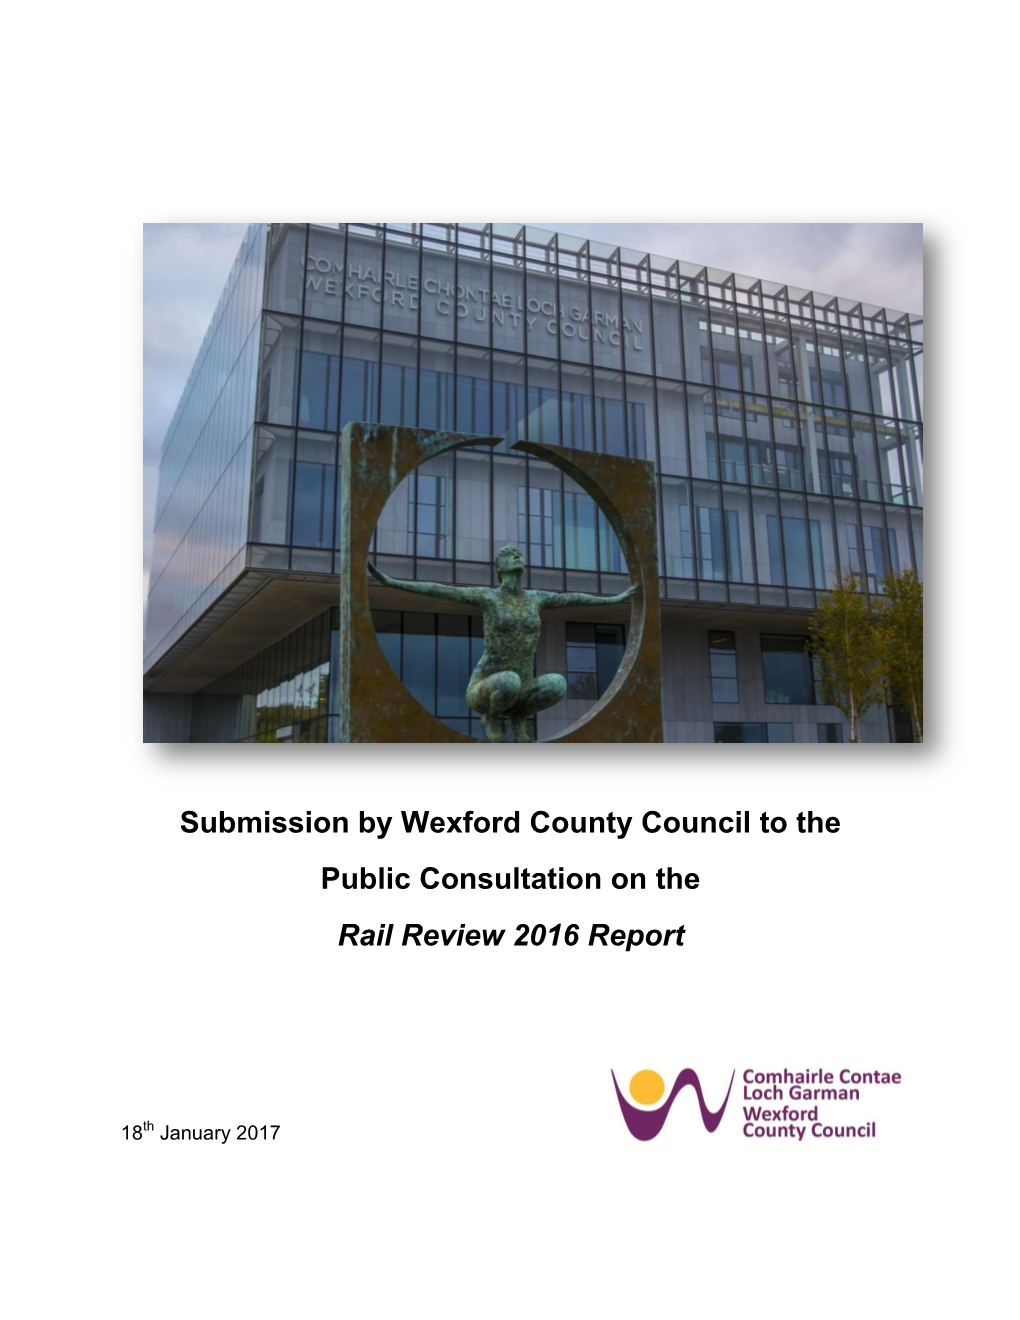 Submission by Wexford County Council to the Public Consultation on The